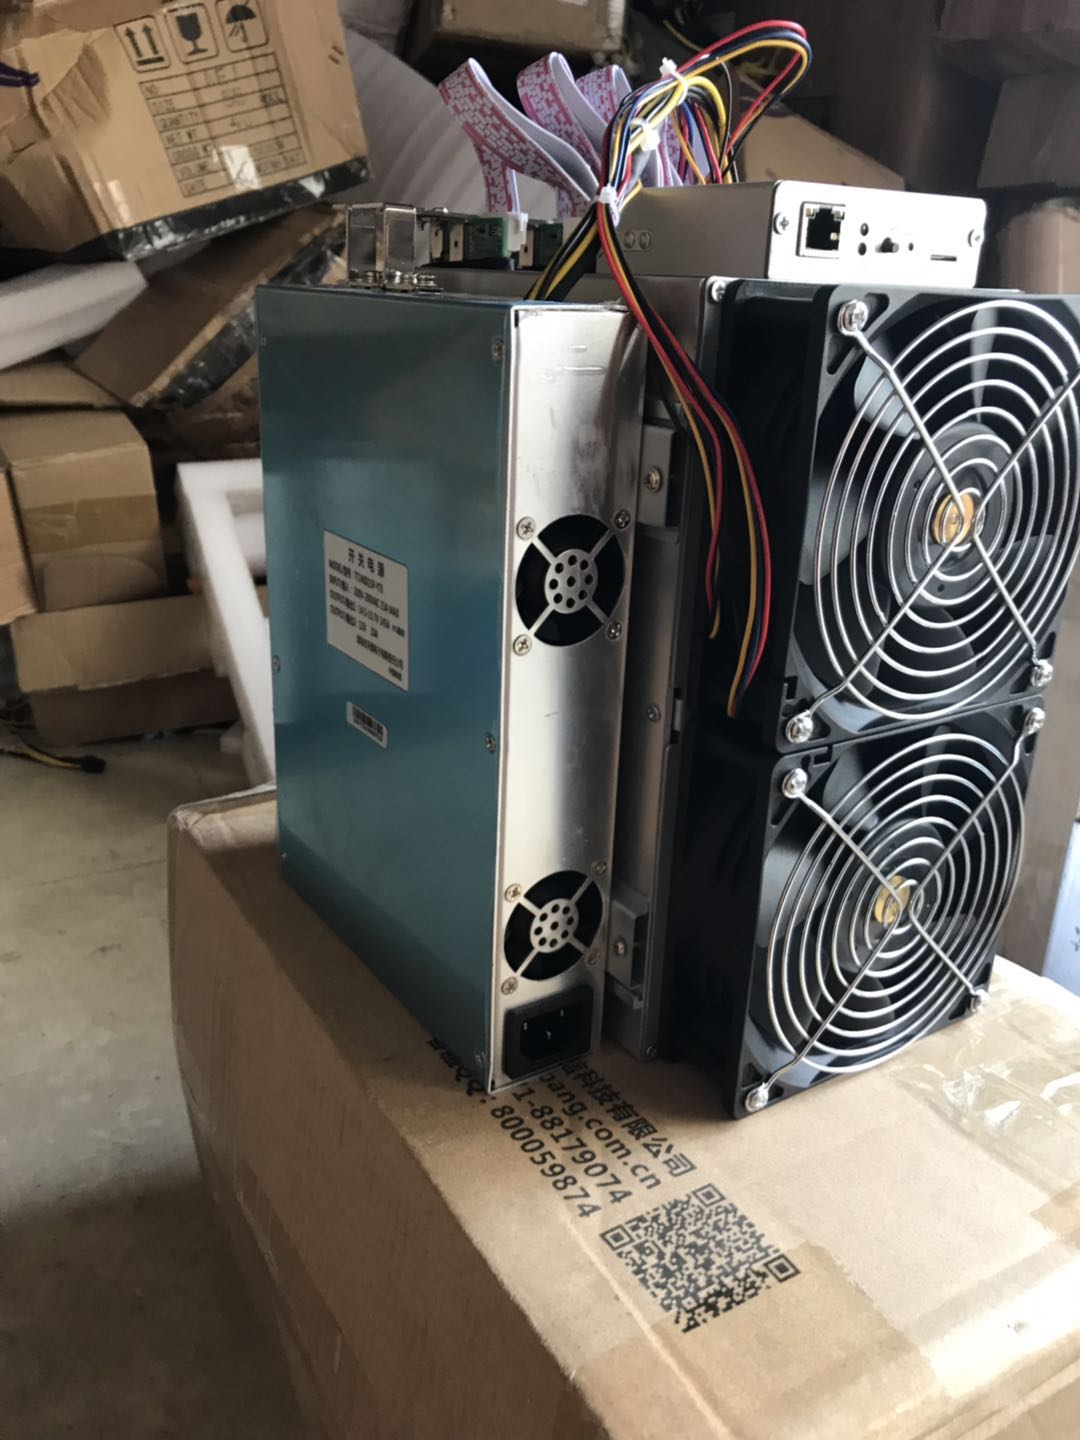 BTC BCH Miner Love Core A1 Miner Aixin A1 25T With PSU Economic Than Antminer S9 S11 S15 S17 T9+ T15 T17 WhatsMiner M3X